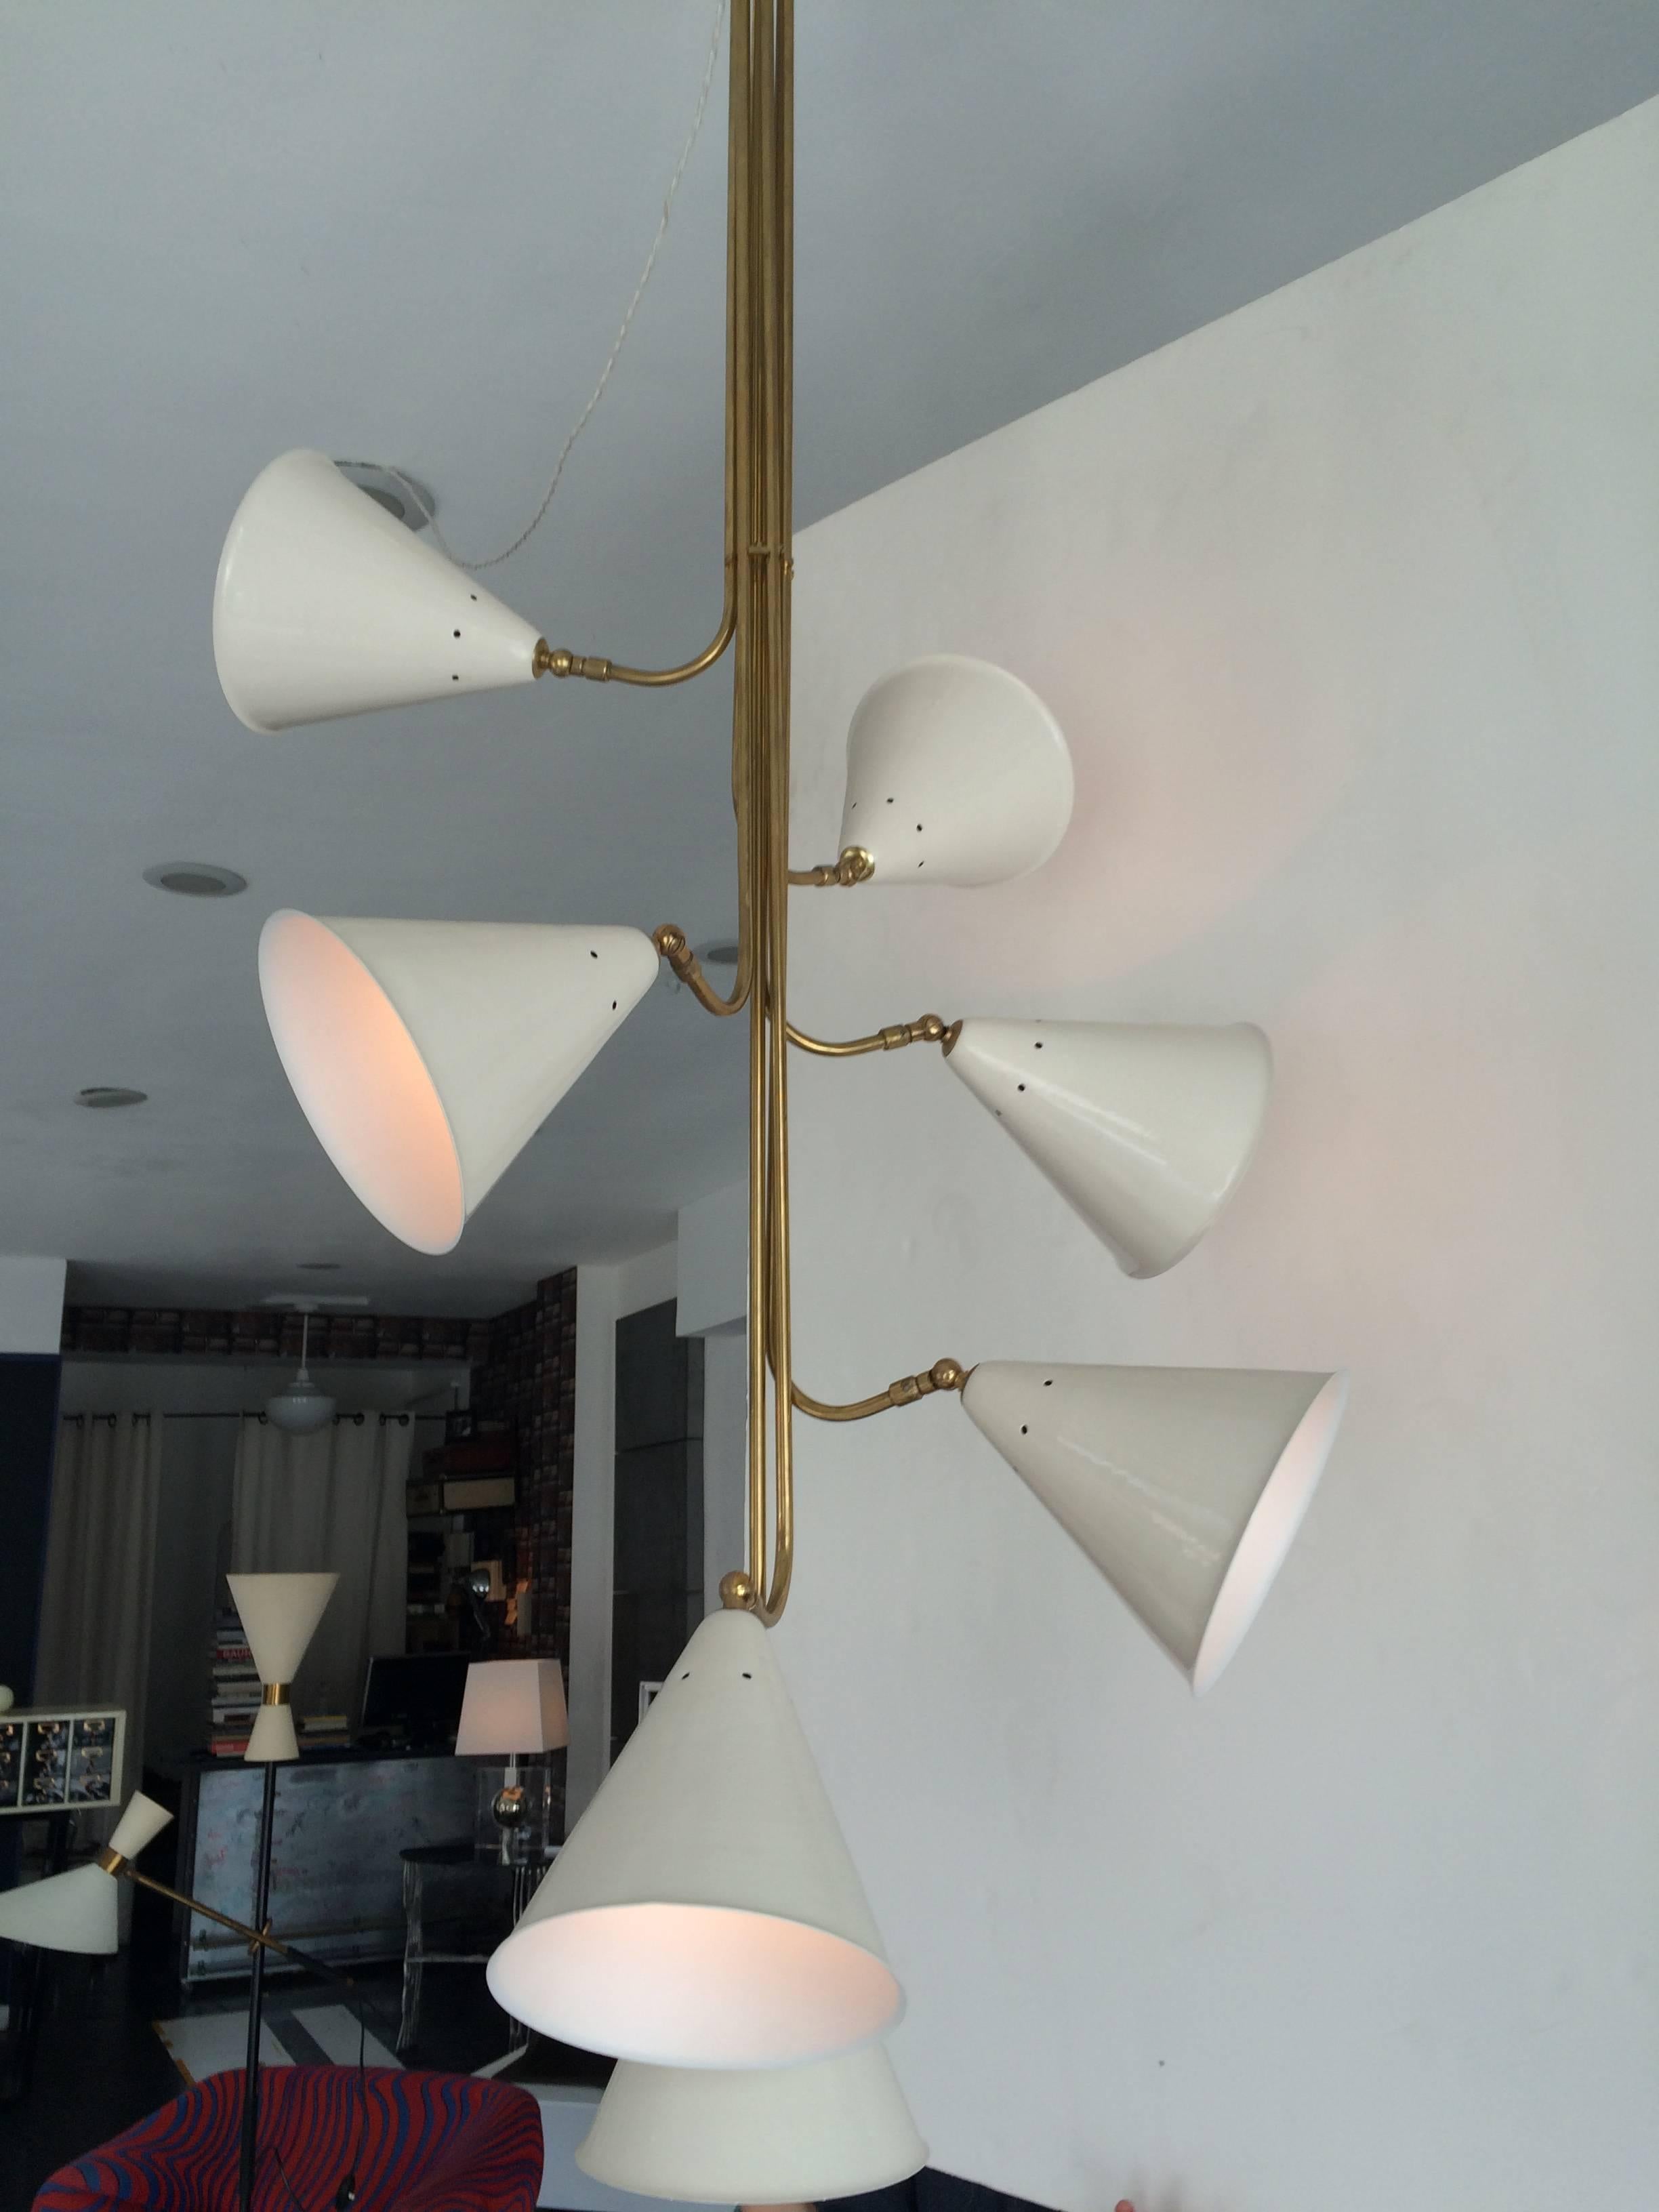 Most incredible two-tone Italian brass drop ceiling light with seven shades. Canopy is very rare, never seen before.